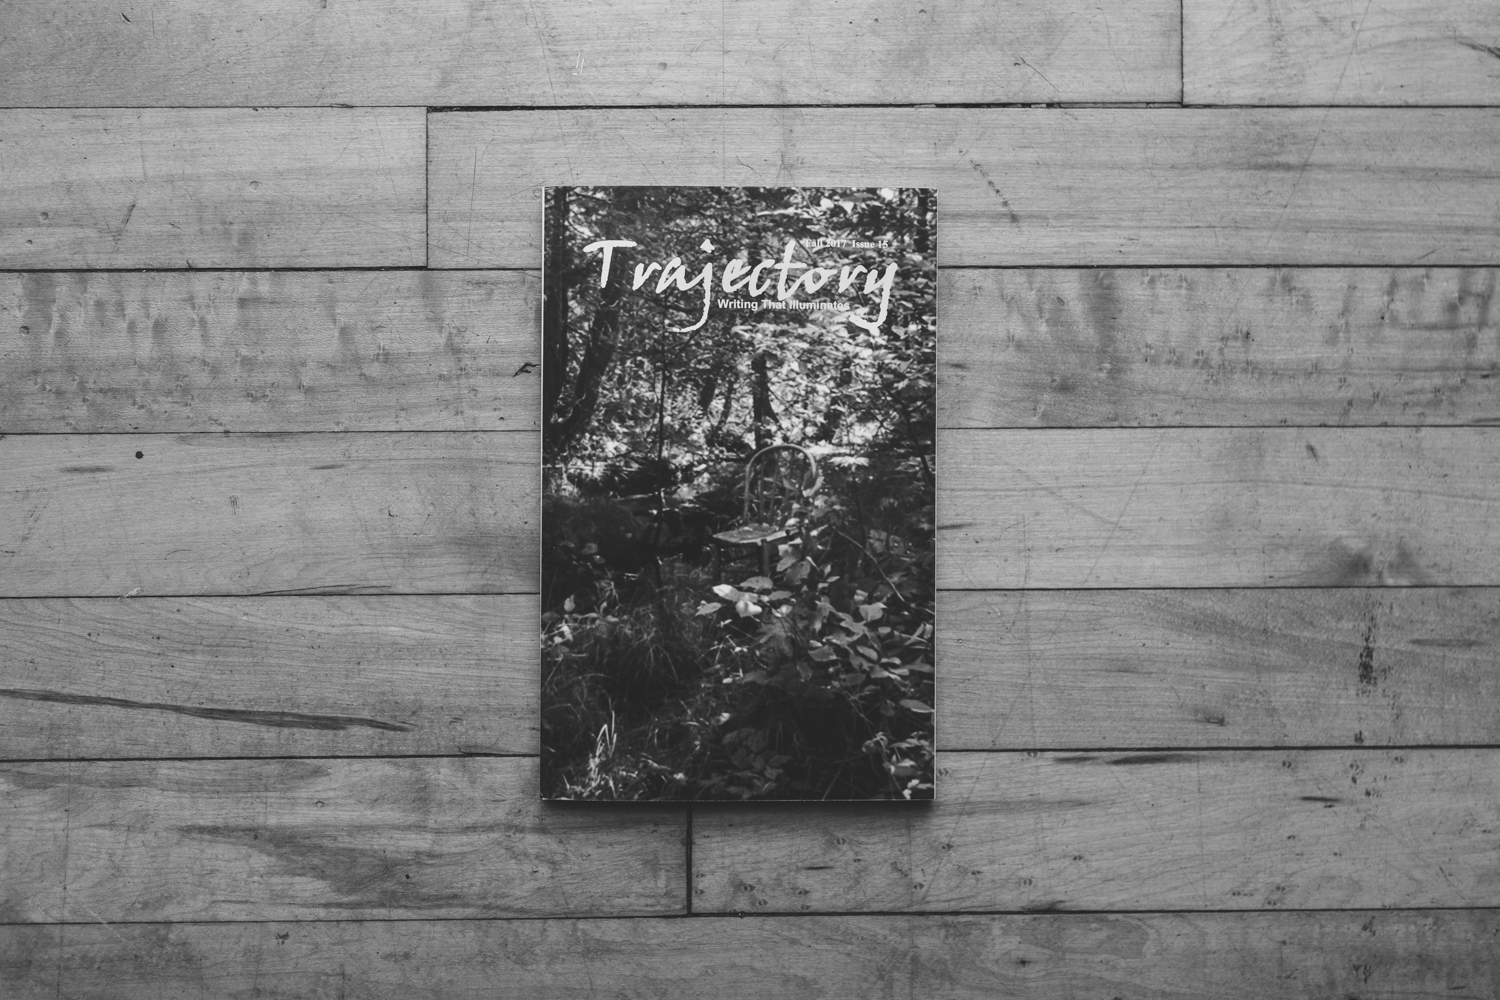 Trajectory Issue 15